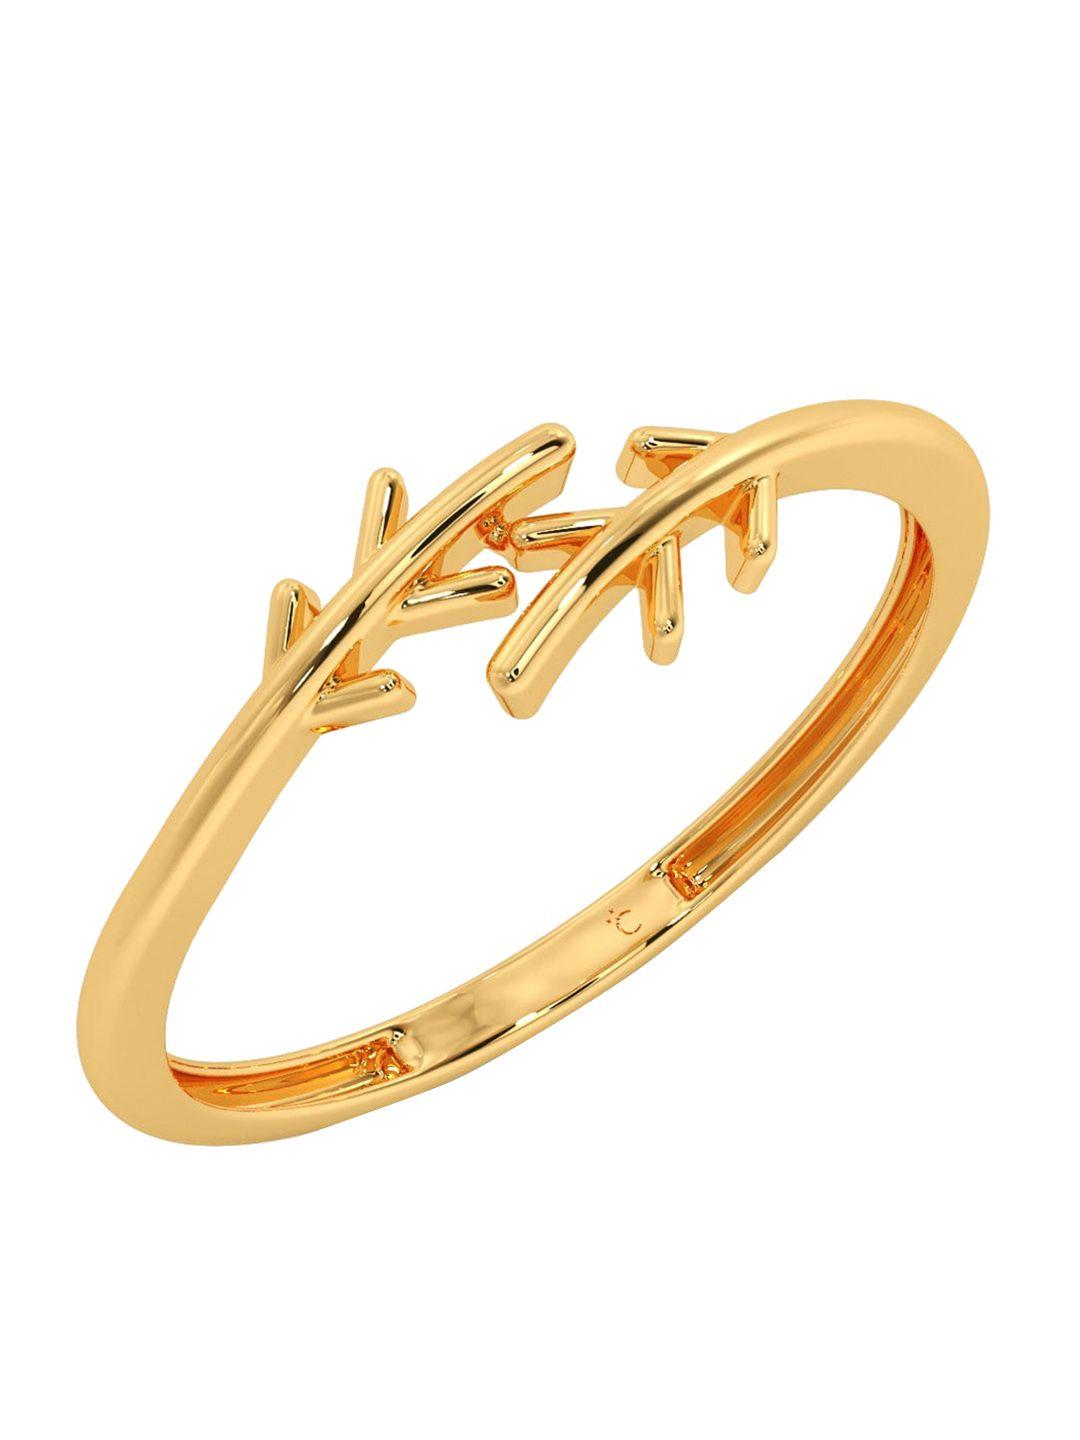 candere-a-kalyan-jewellers-company-18kt-gold-ring-1.12gm